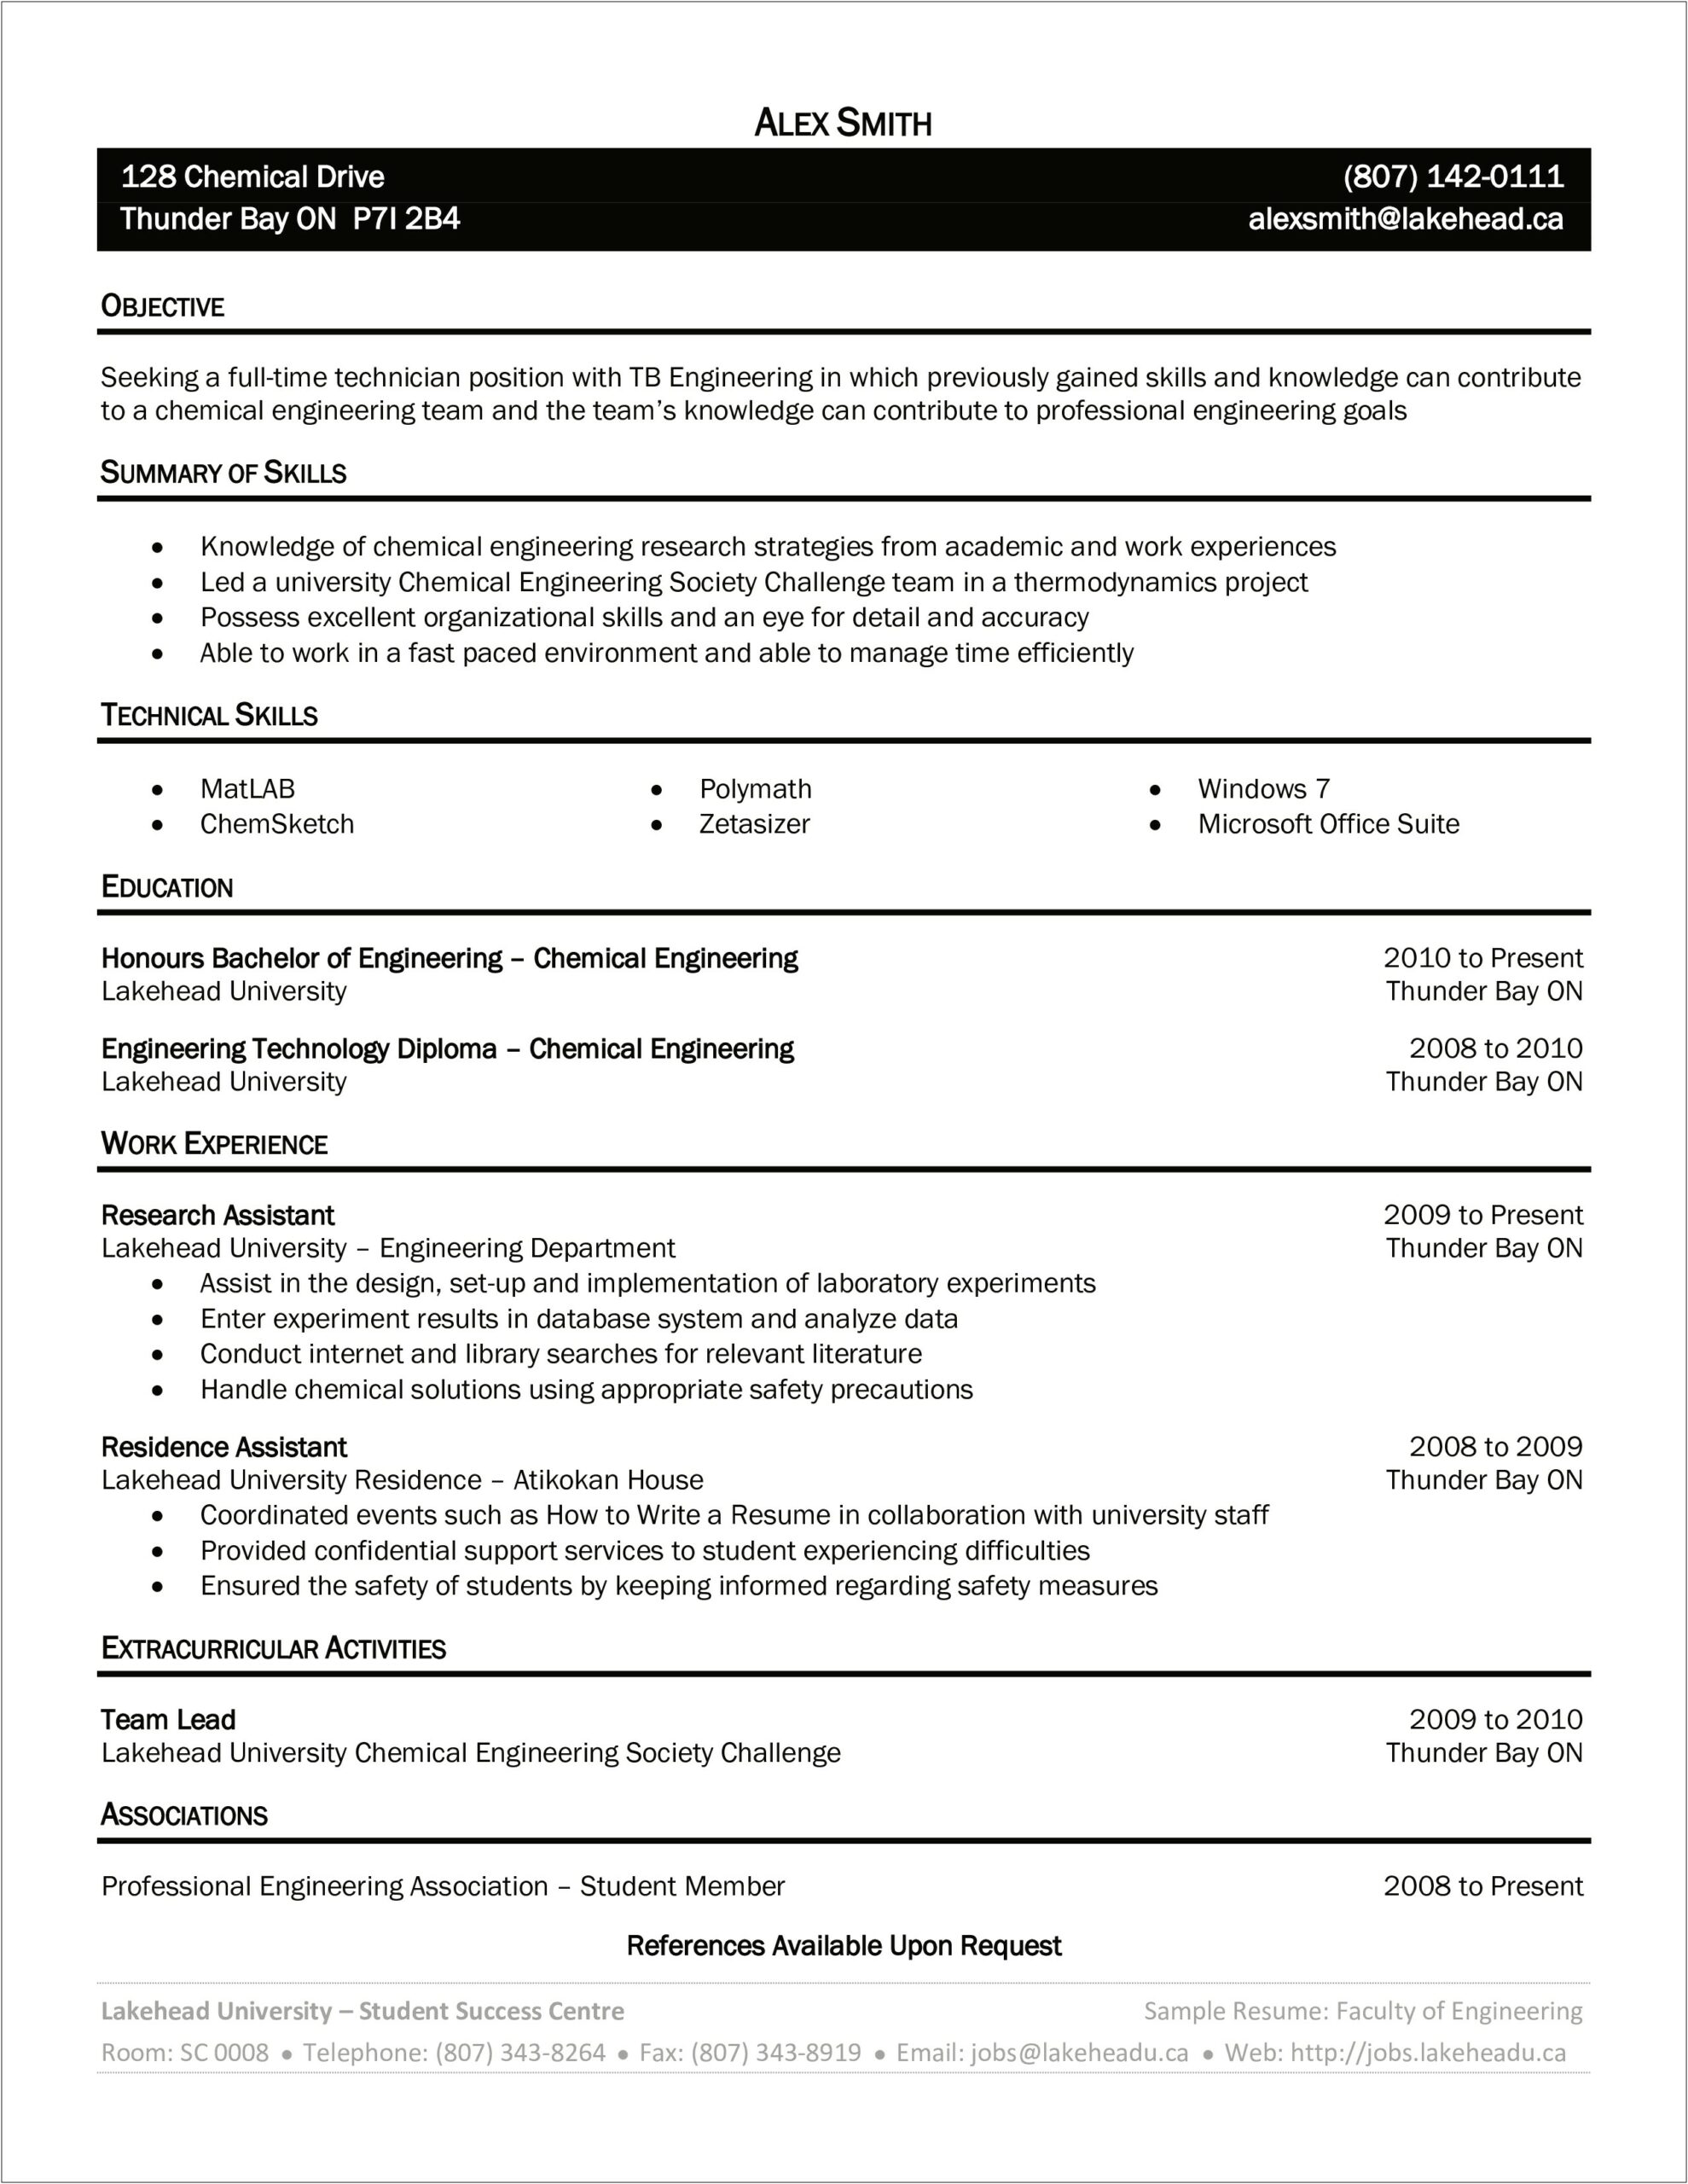 Sample Resume For Engineering Students